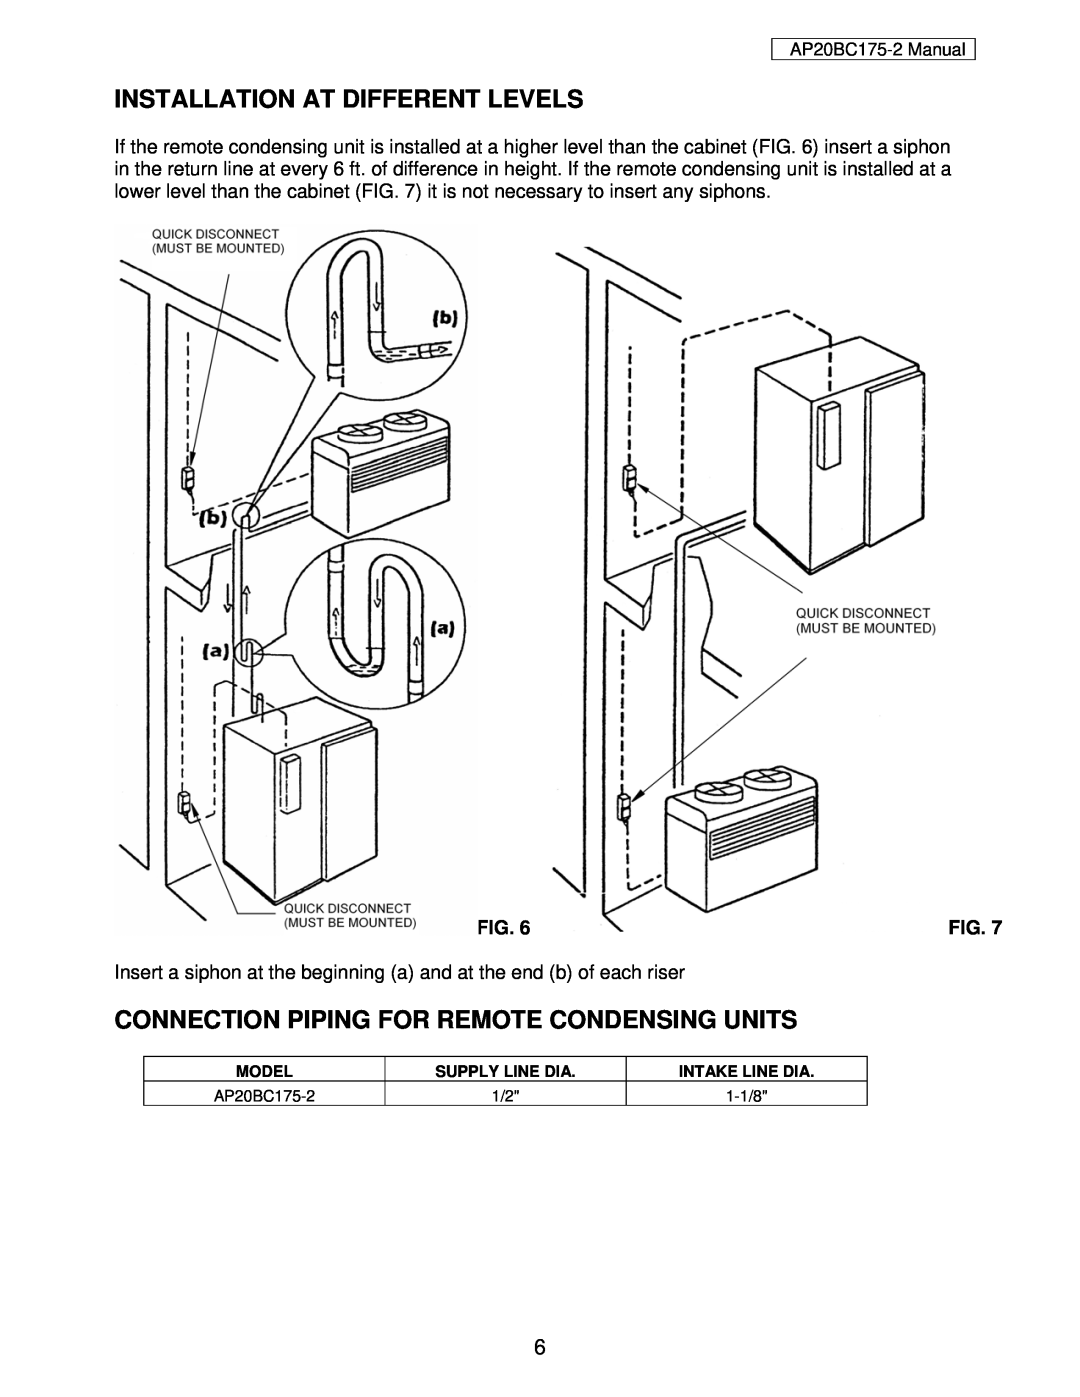 American Panel AP20BC175-2 user manual Installation At Different Levels, Connection Piping For Remote Condensing Units 